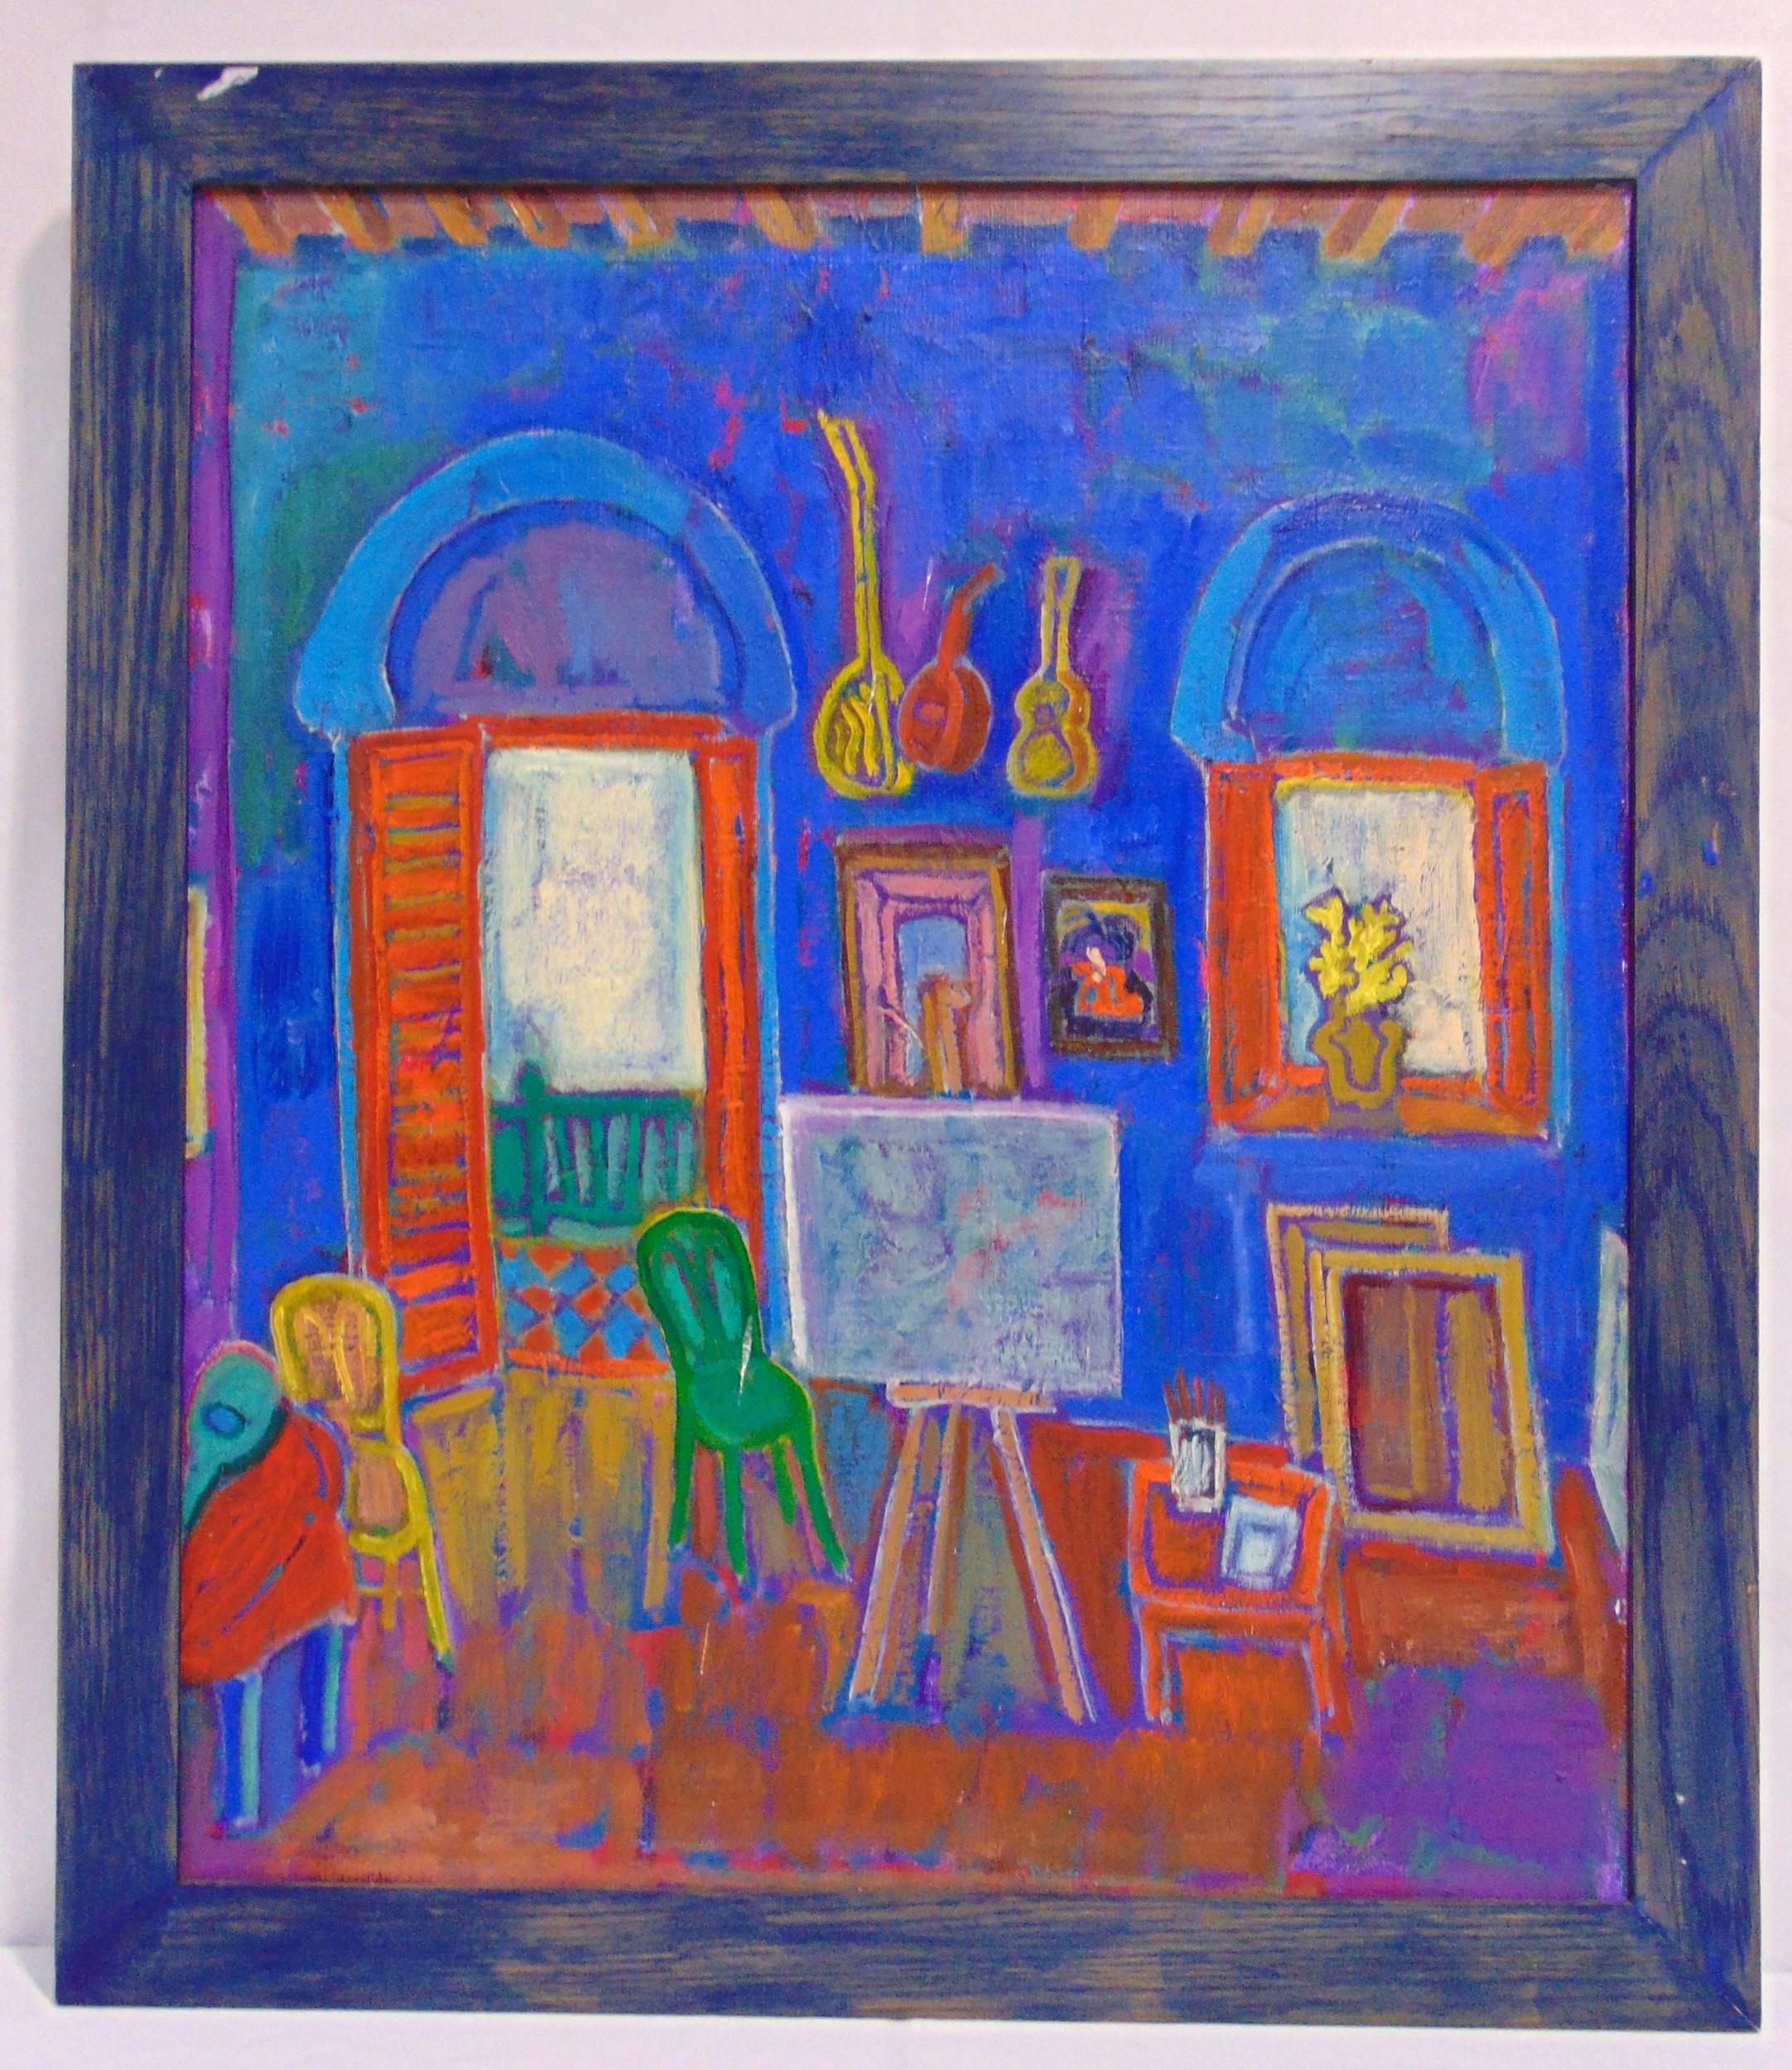 Luis Orozco framed oil on canvas titled Painters Studio, signed top left, 66 x 56cm